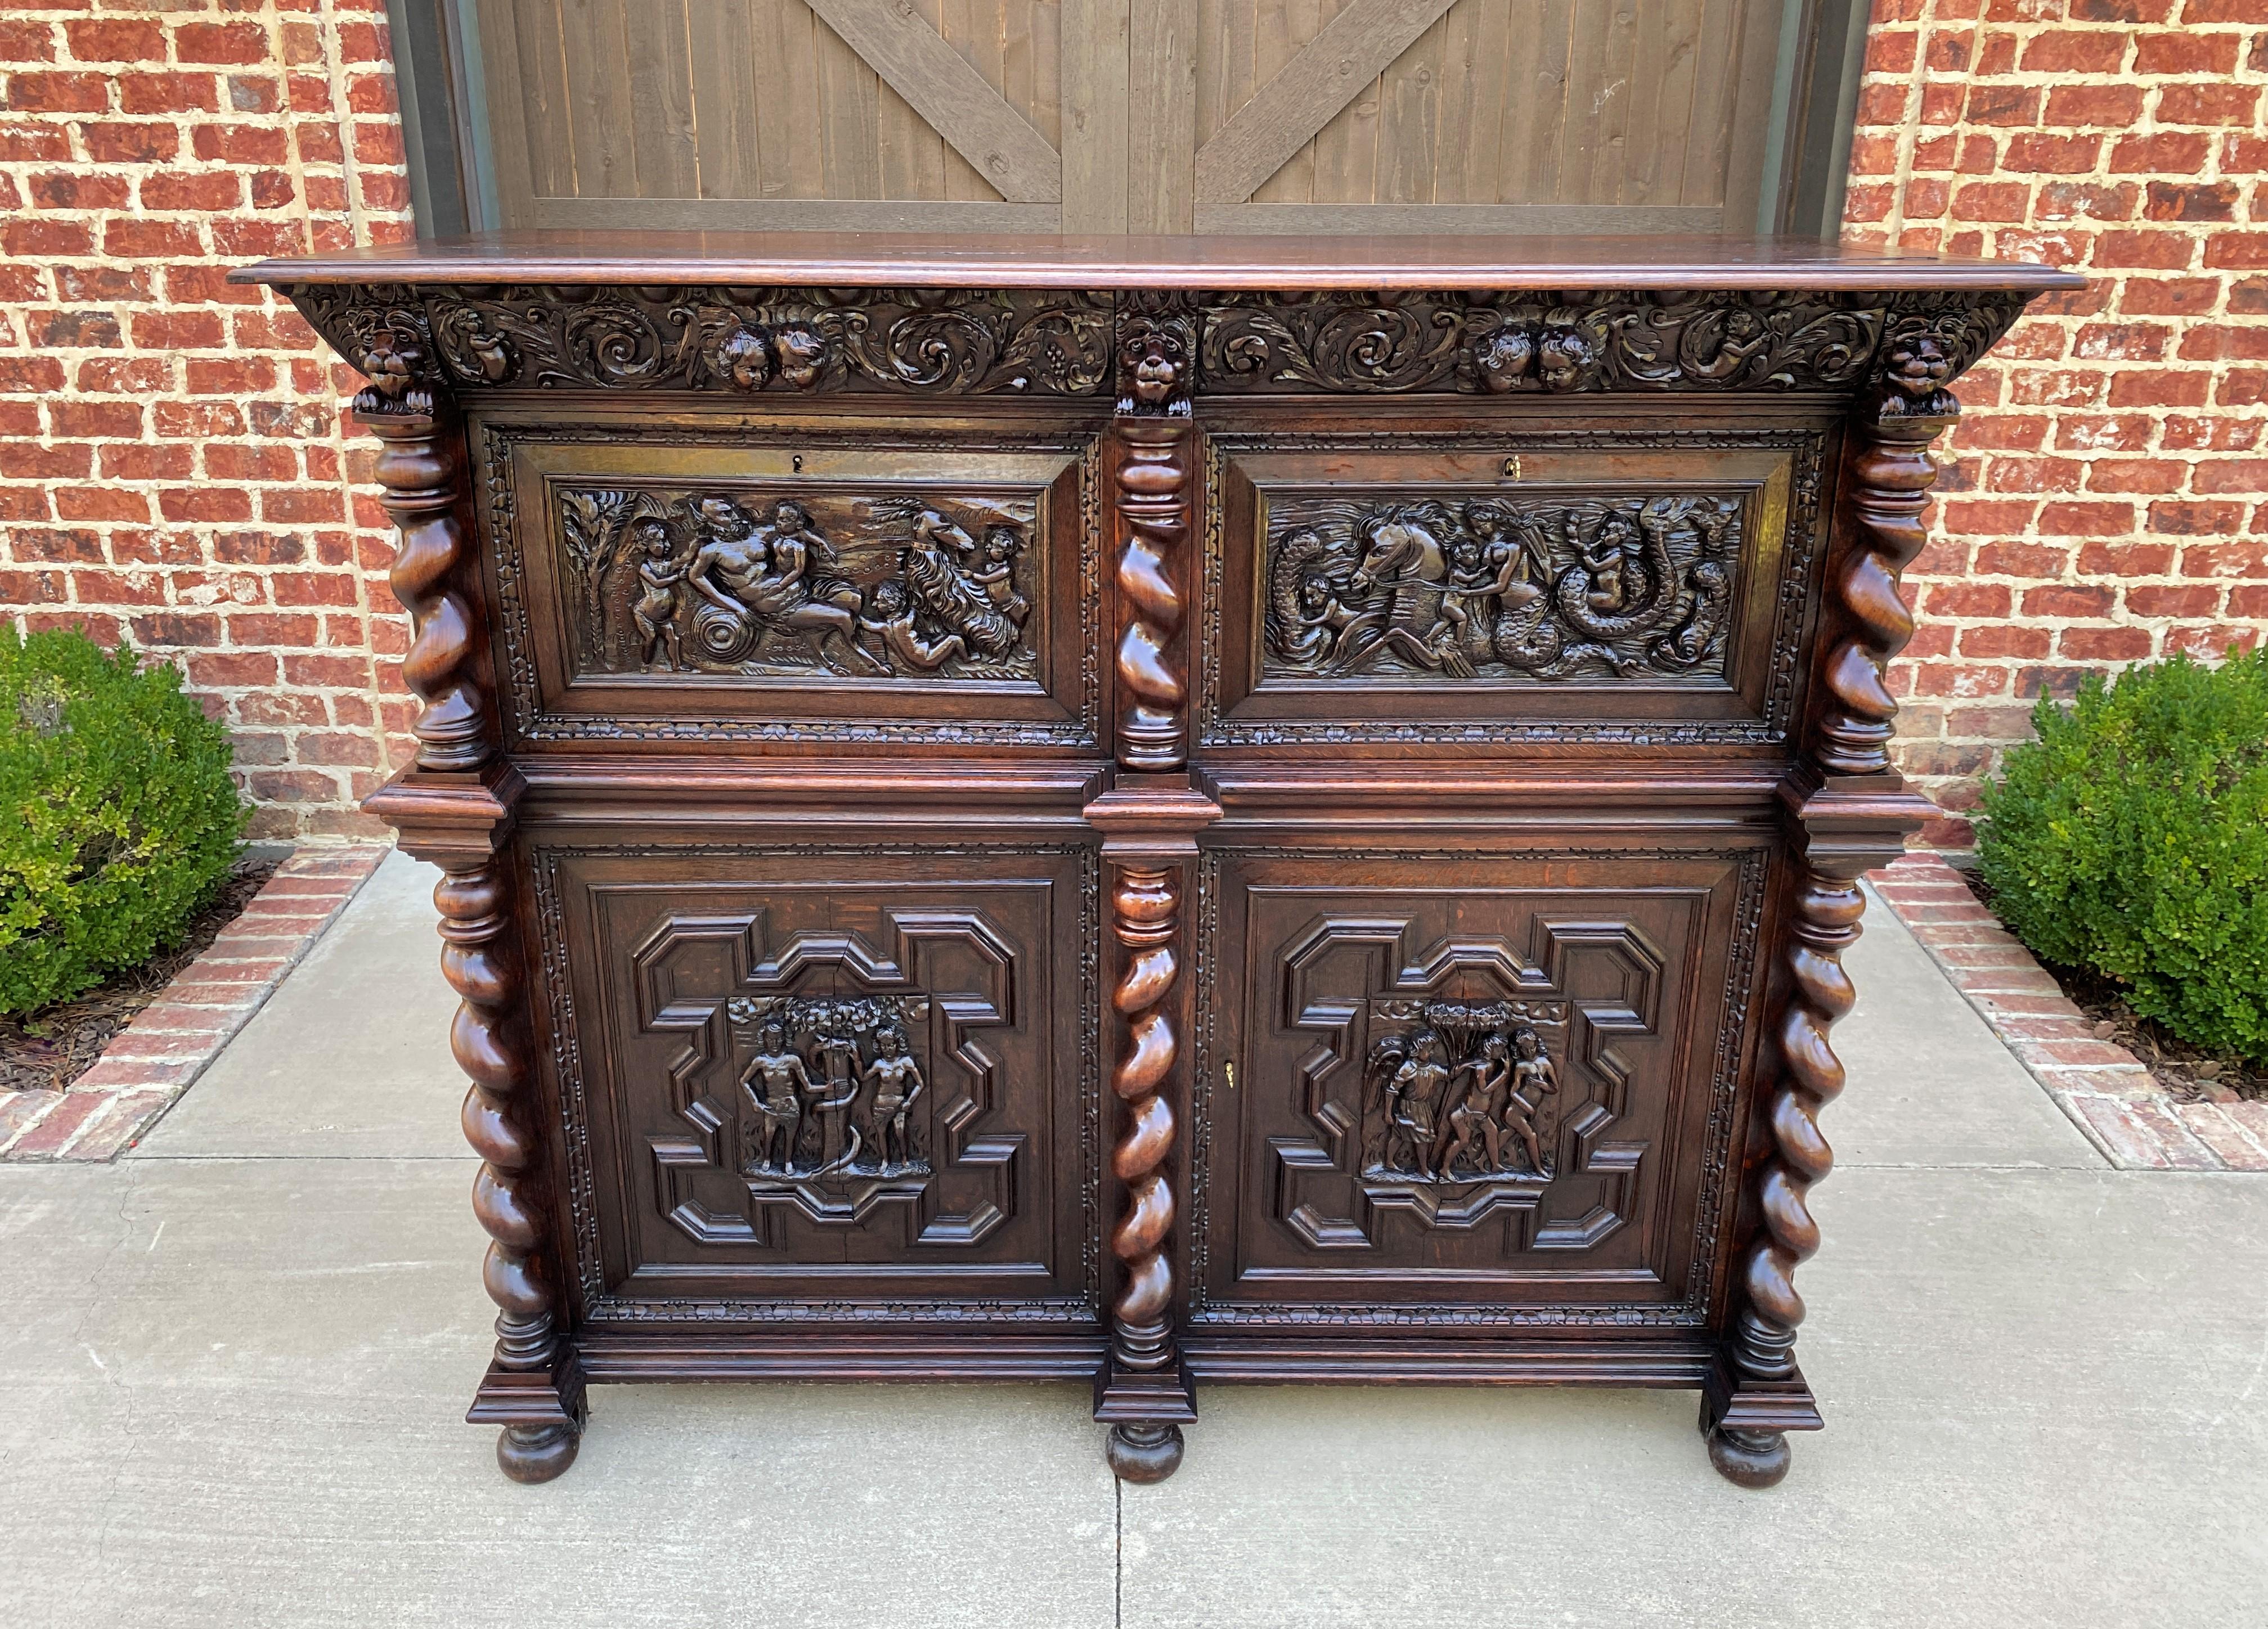 Superb antique french oak allegorical cabinet, sideboard, server, buffet, liquor cabinet or bar~~highly carved with barley twist pillars and biblical scene carvings ~~c.
1880s 

This is a must see! Outstanding 19th century French oak exquisitely